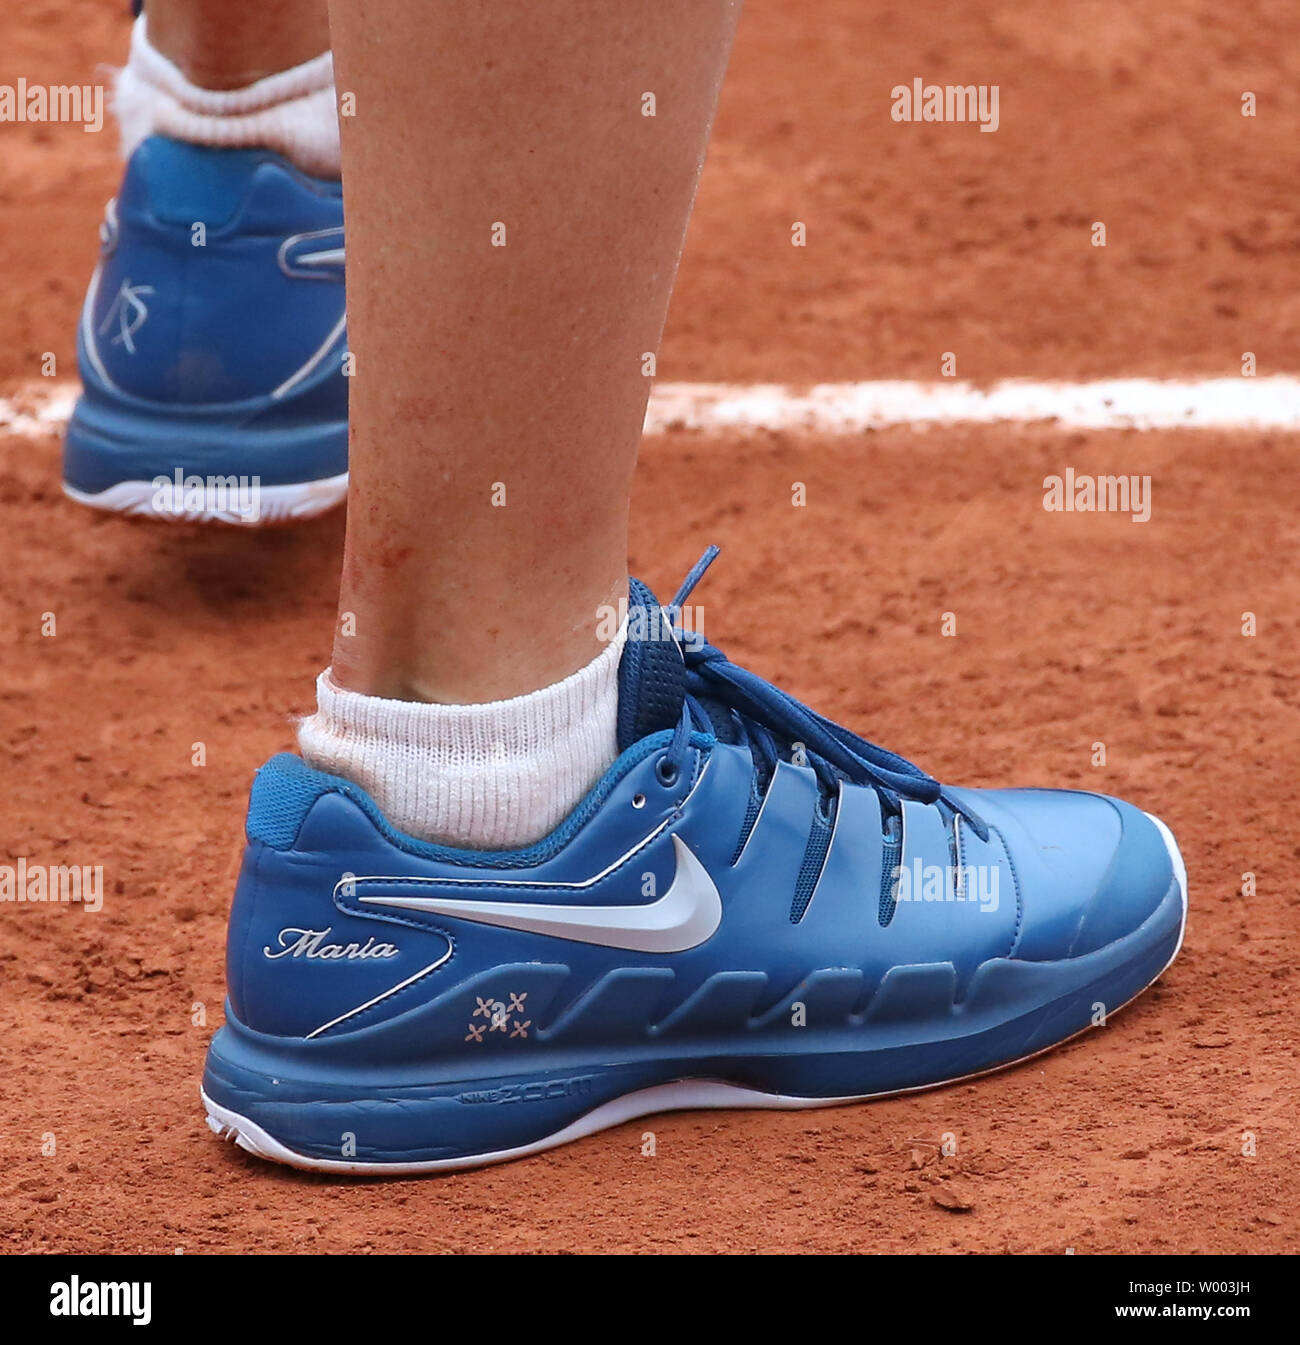 The shoes of Maria Sharapova of Russia are seen during her French Open  women's first round match against Richel Hogenkamp of The Netherlands at  Roland Garros in Paris on May 29, 2018.